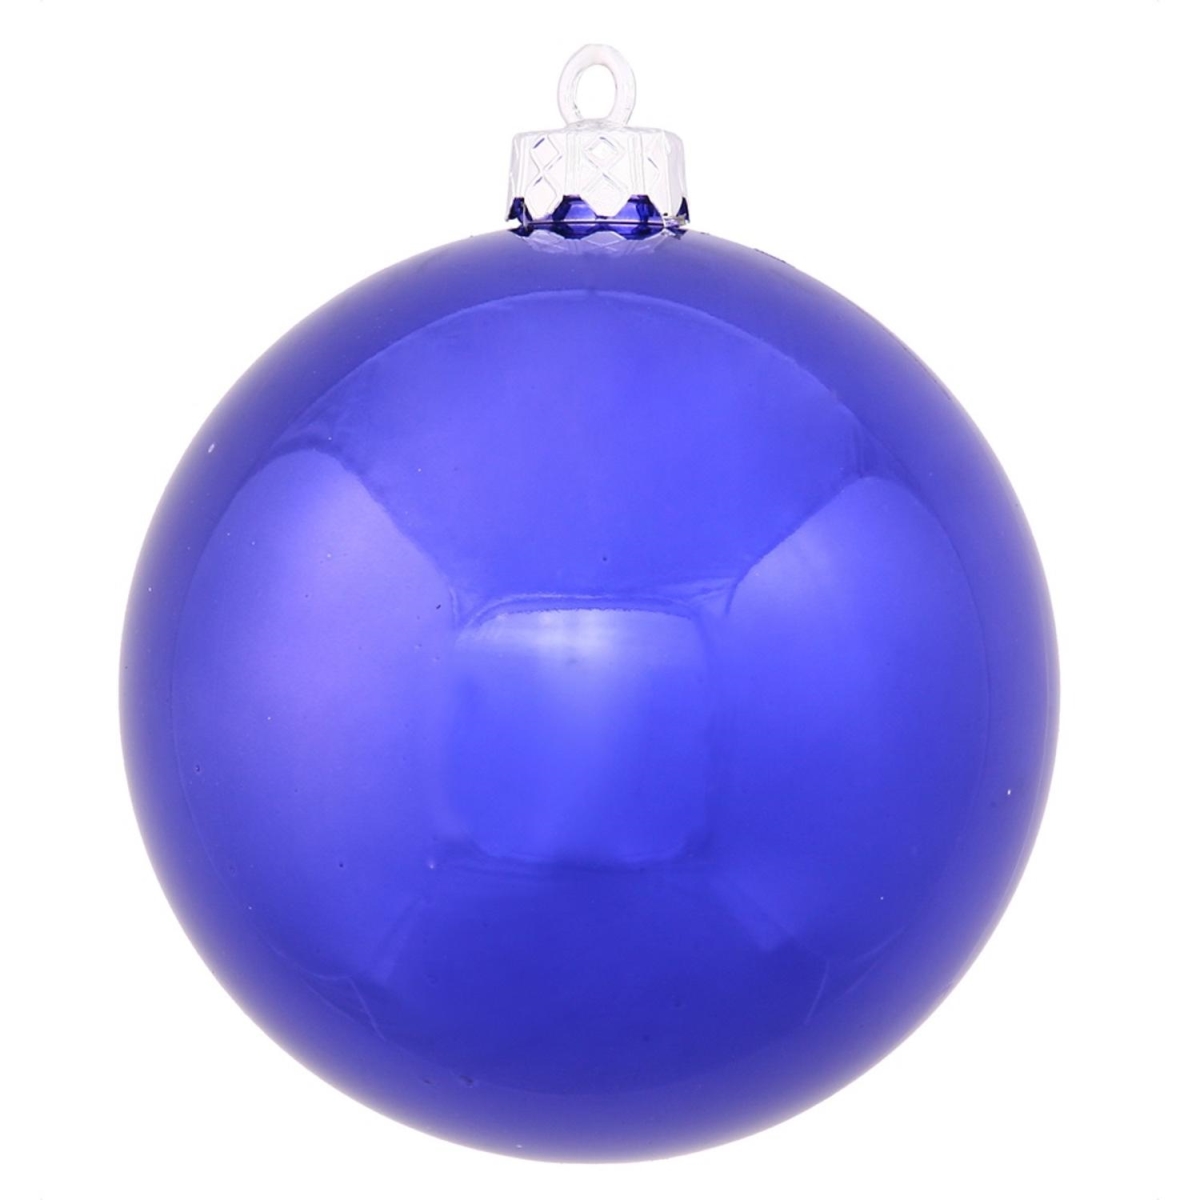 31749479 Shiny Cobalt Uv Resistant Commercial Drilled Shatterproof Christmas Ball Ornament - 2.75 In.